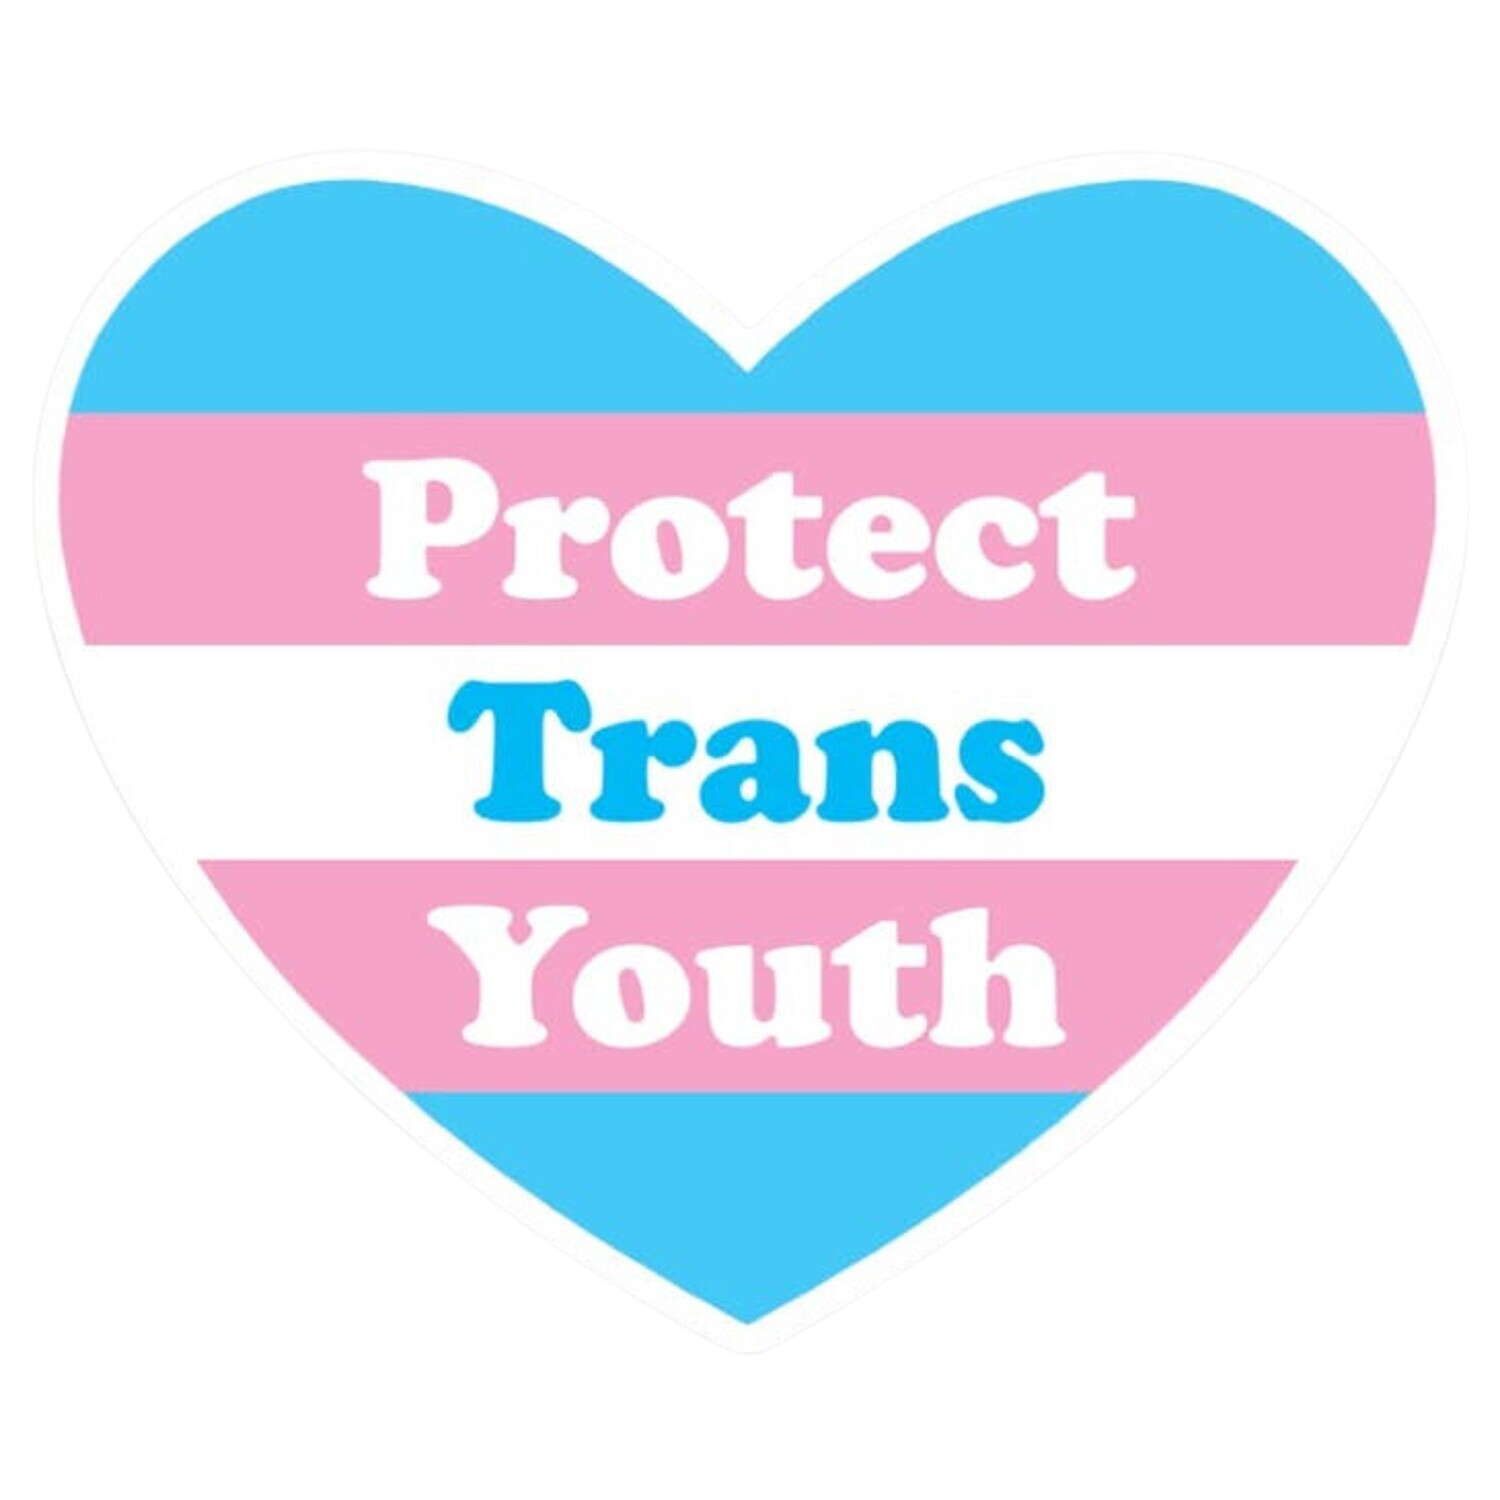 PROTECT TRANS YOUTH HEART STICKER